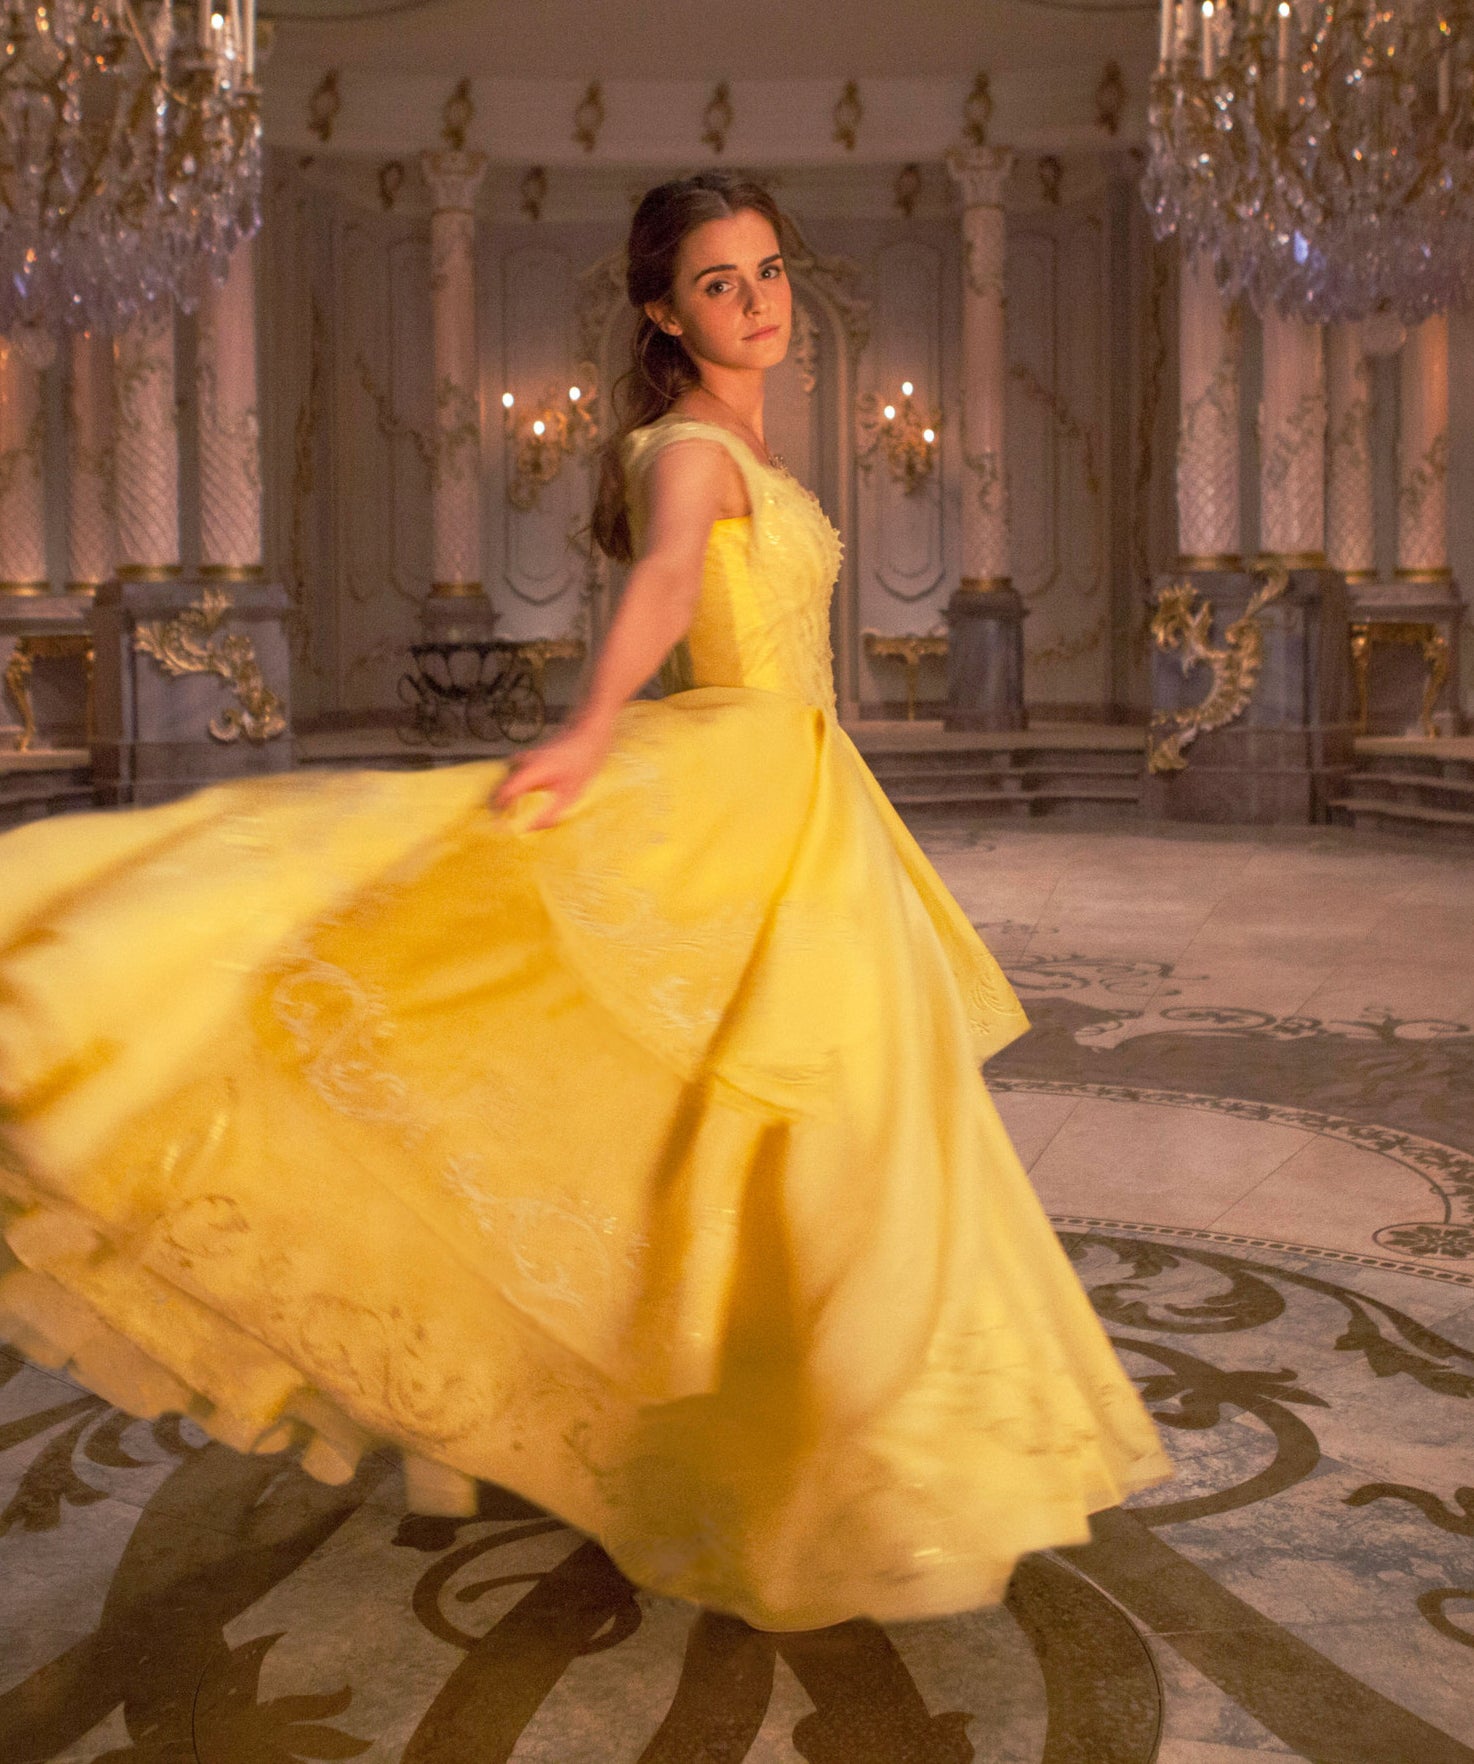 Belle stands with her flowing gown